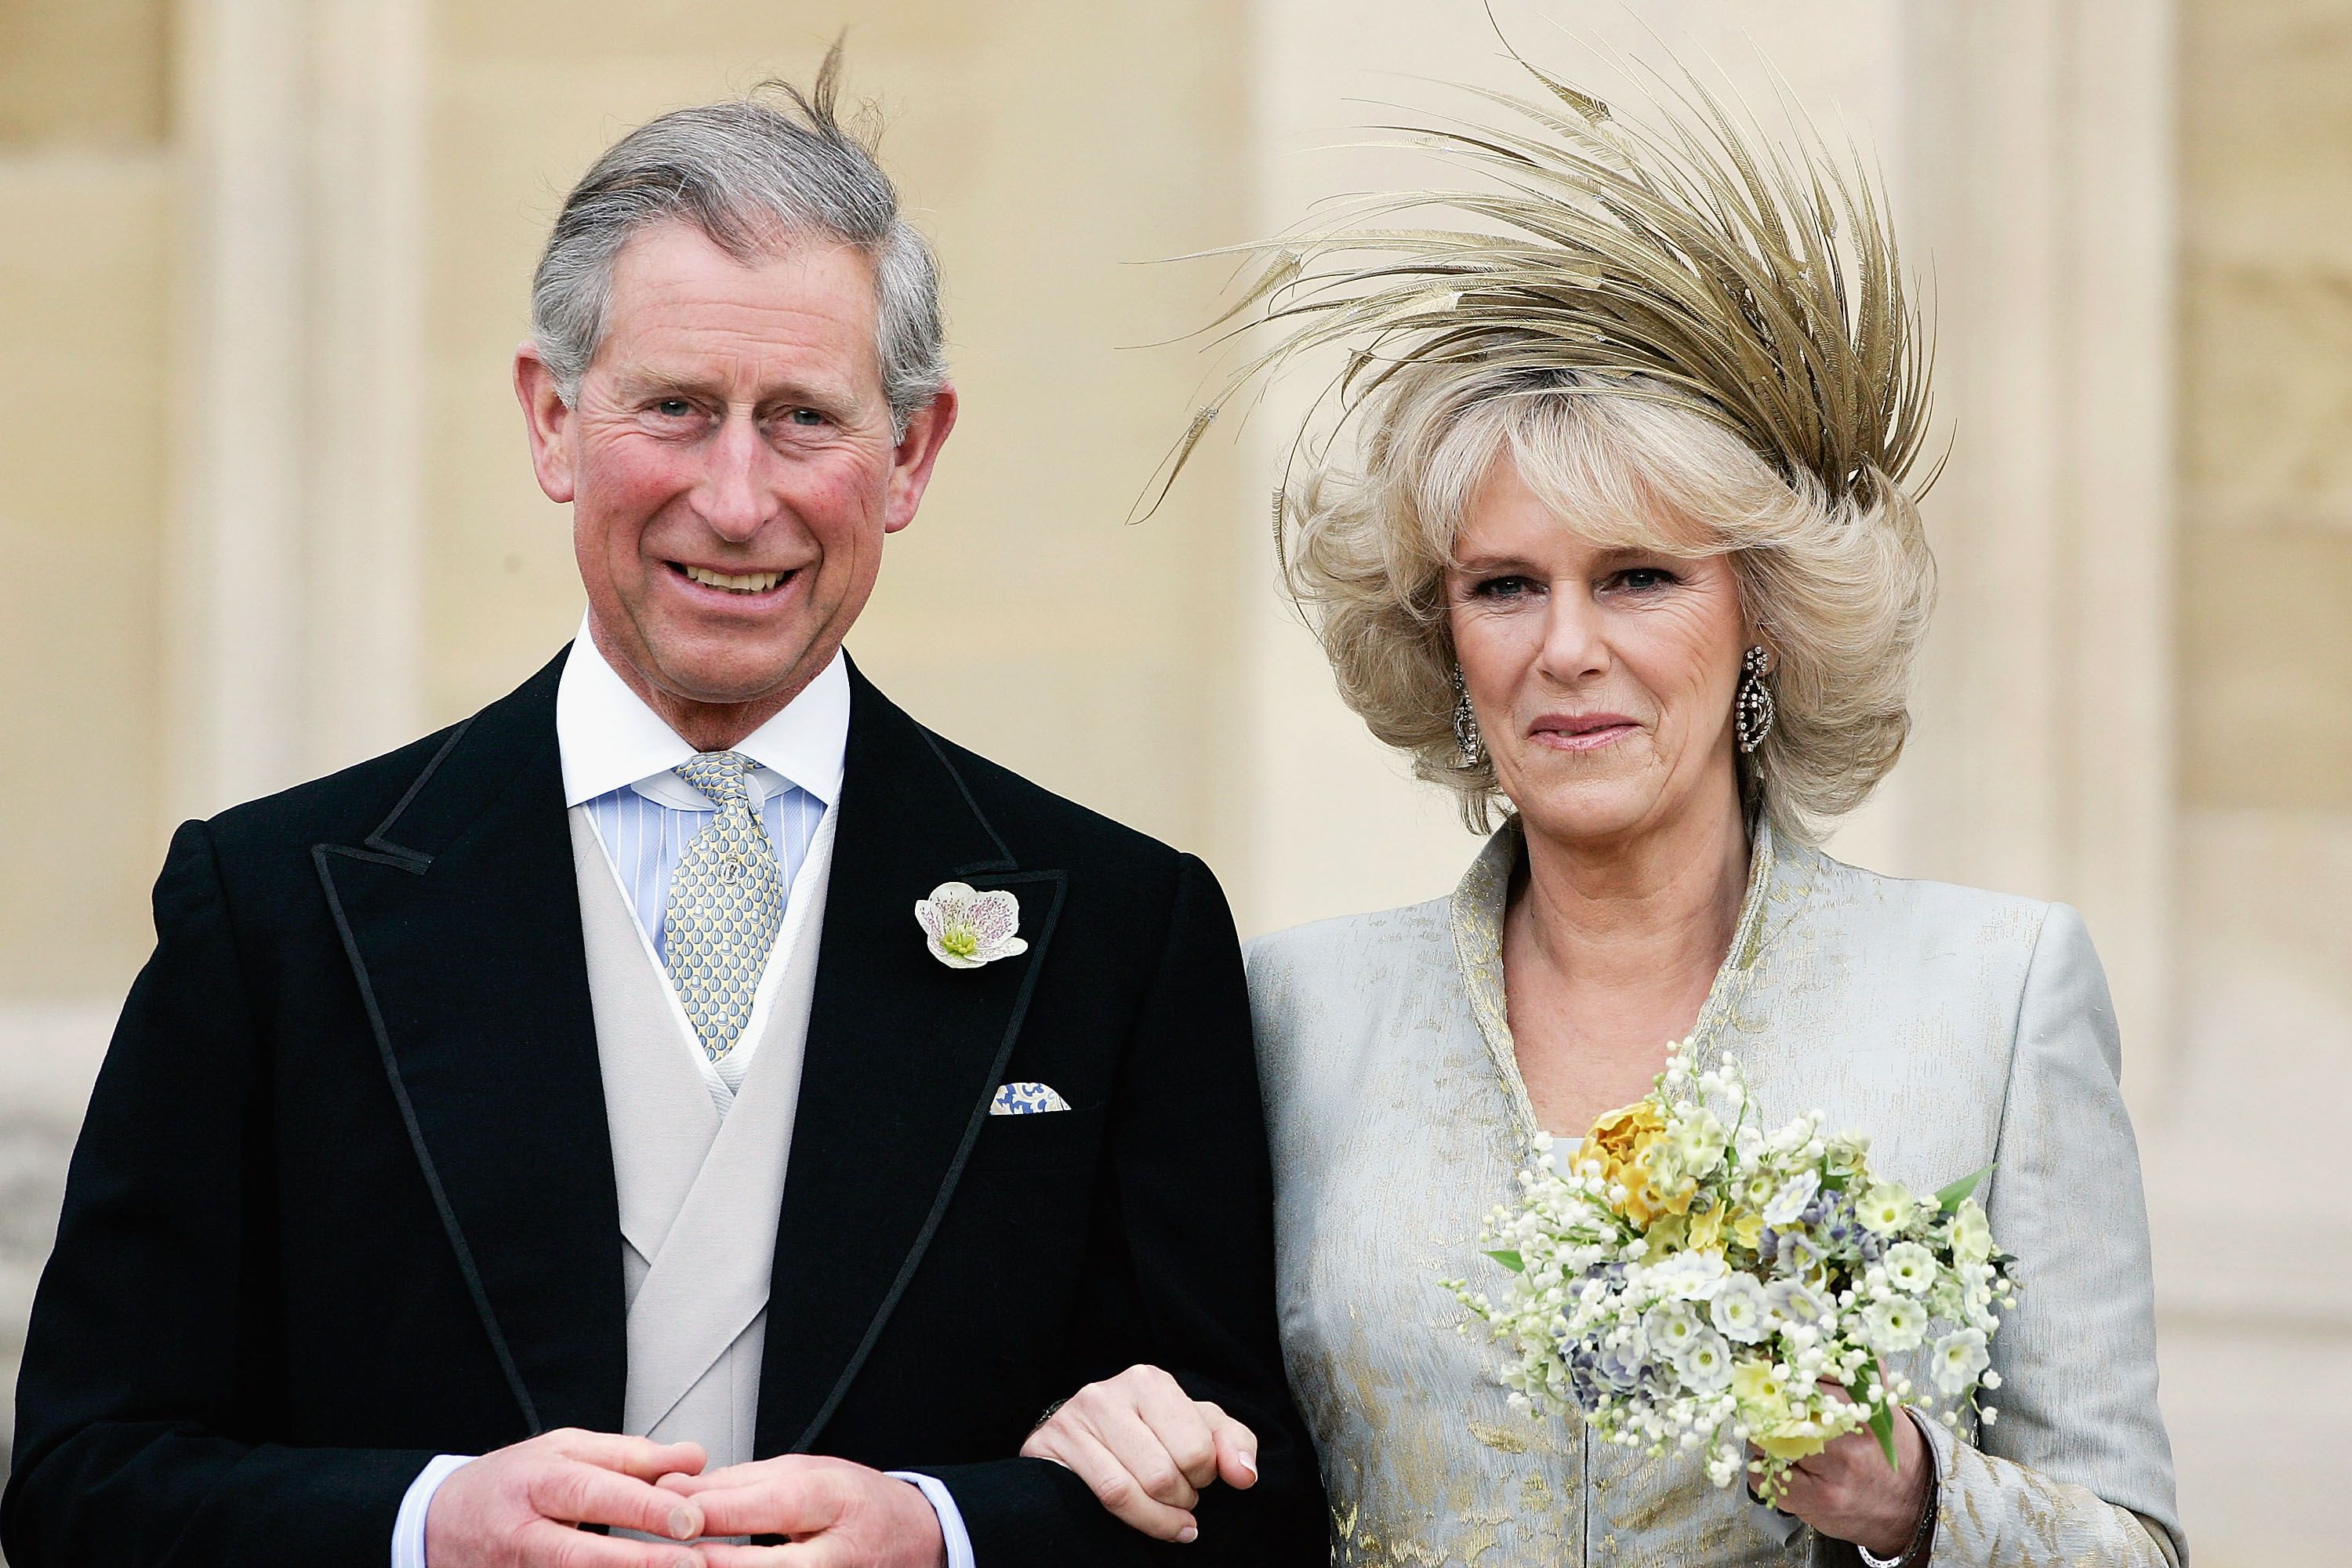 Prince Charles and Duchess Camilla during the Service of Prayer and Dedication blessing their marriage at Windsor Castle on April 9, 2005, in Berkshire, England | Photo: Getty Images